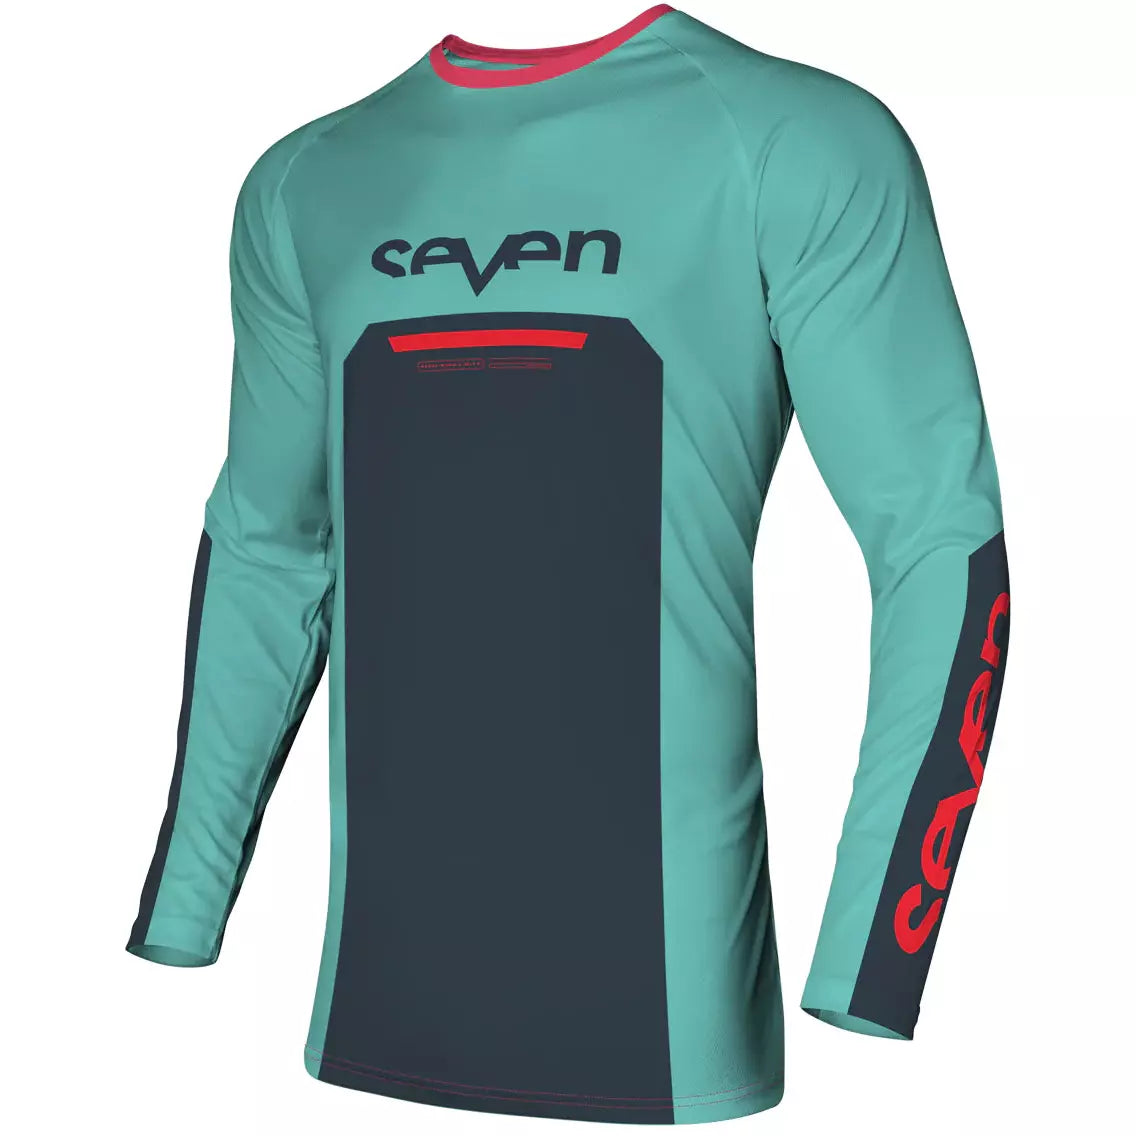 SEVEN-VOX-PHASER-JERSEY - Riding Gear - Synik Clothing - synikclothing.com